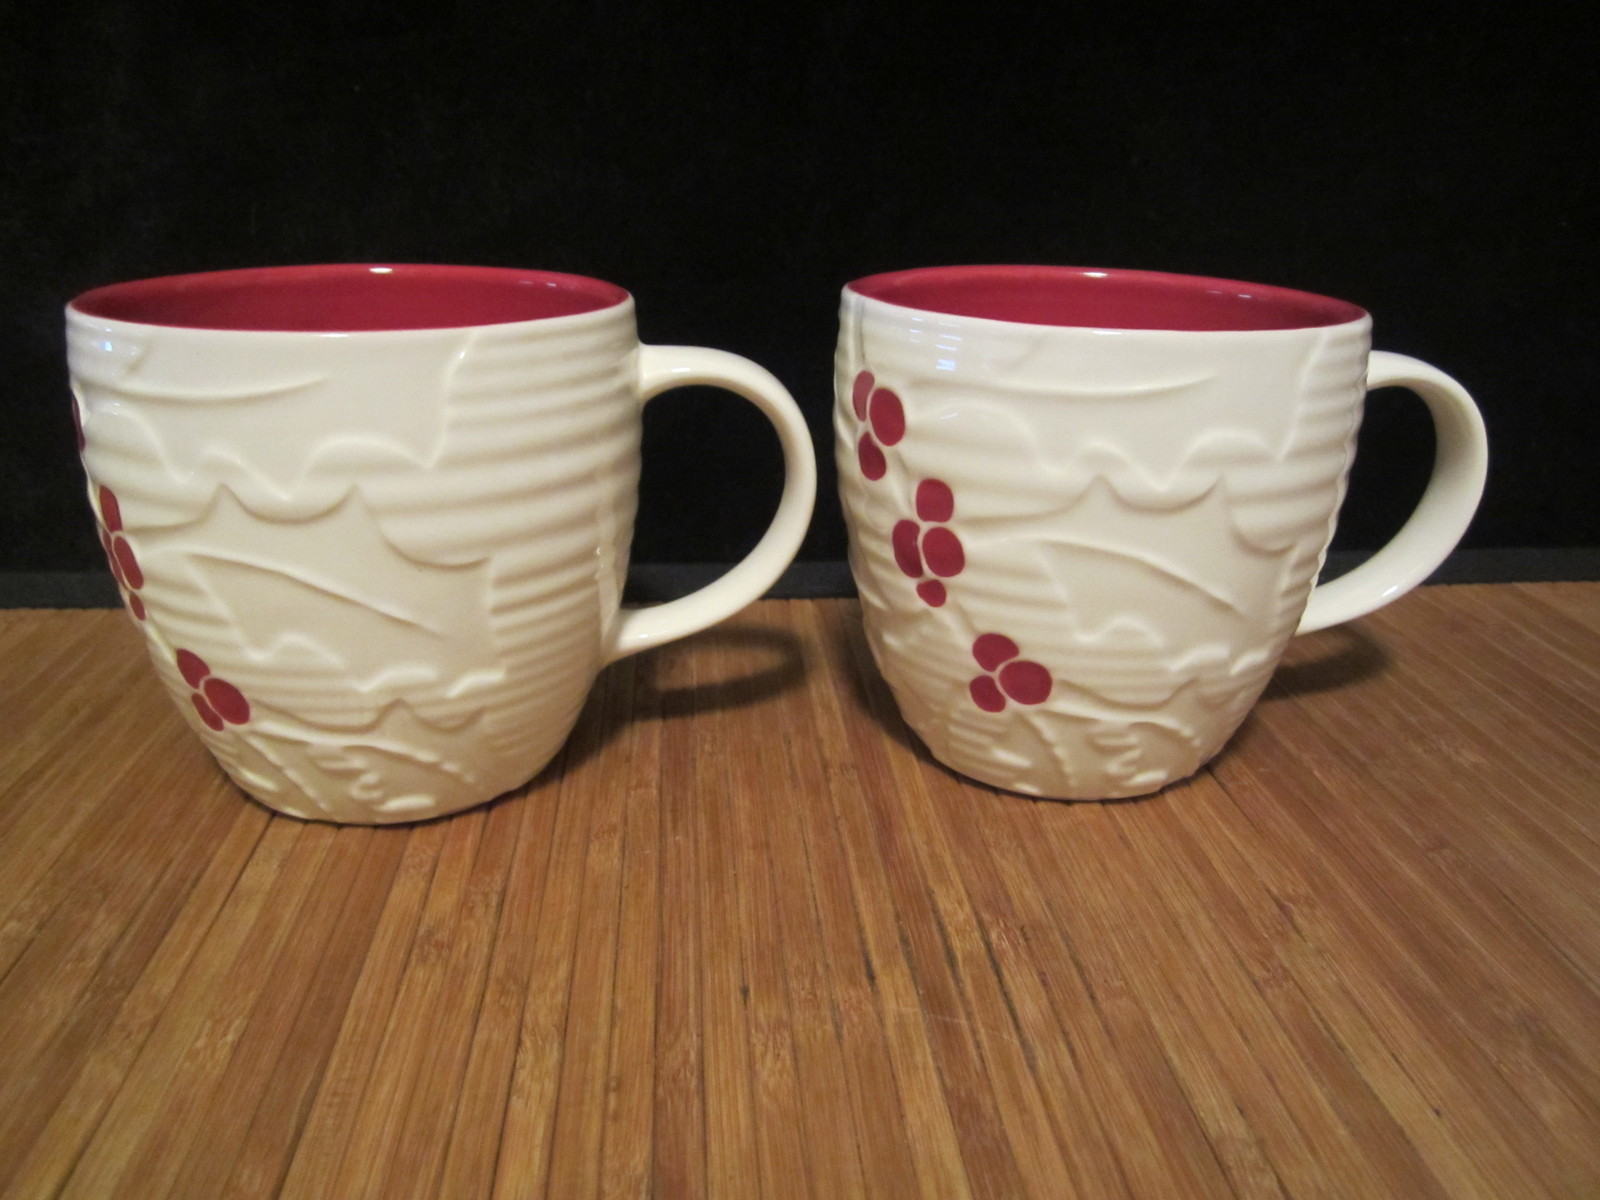 2 STARBUCKS Coffee Tea Cup 2010 Red White Holly Berry Mug Hand Painted 16 oz - $29.99